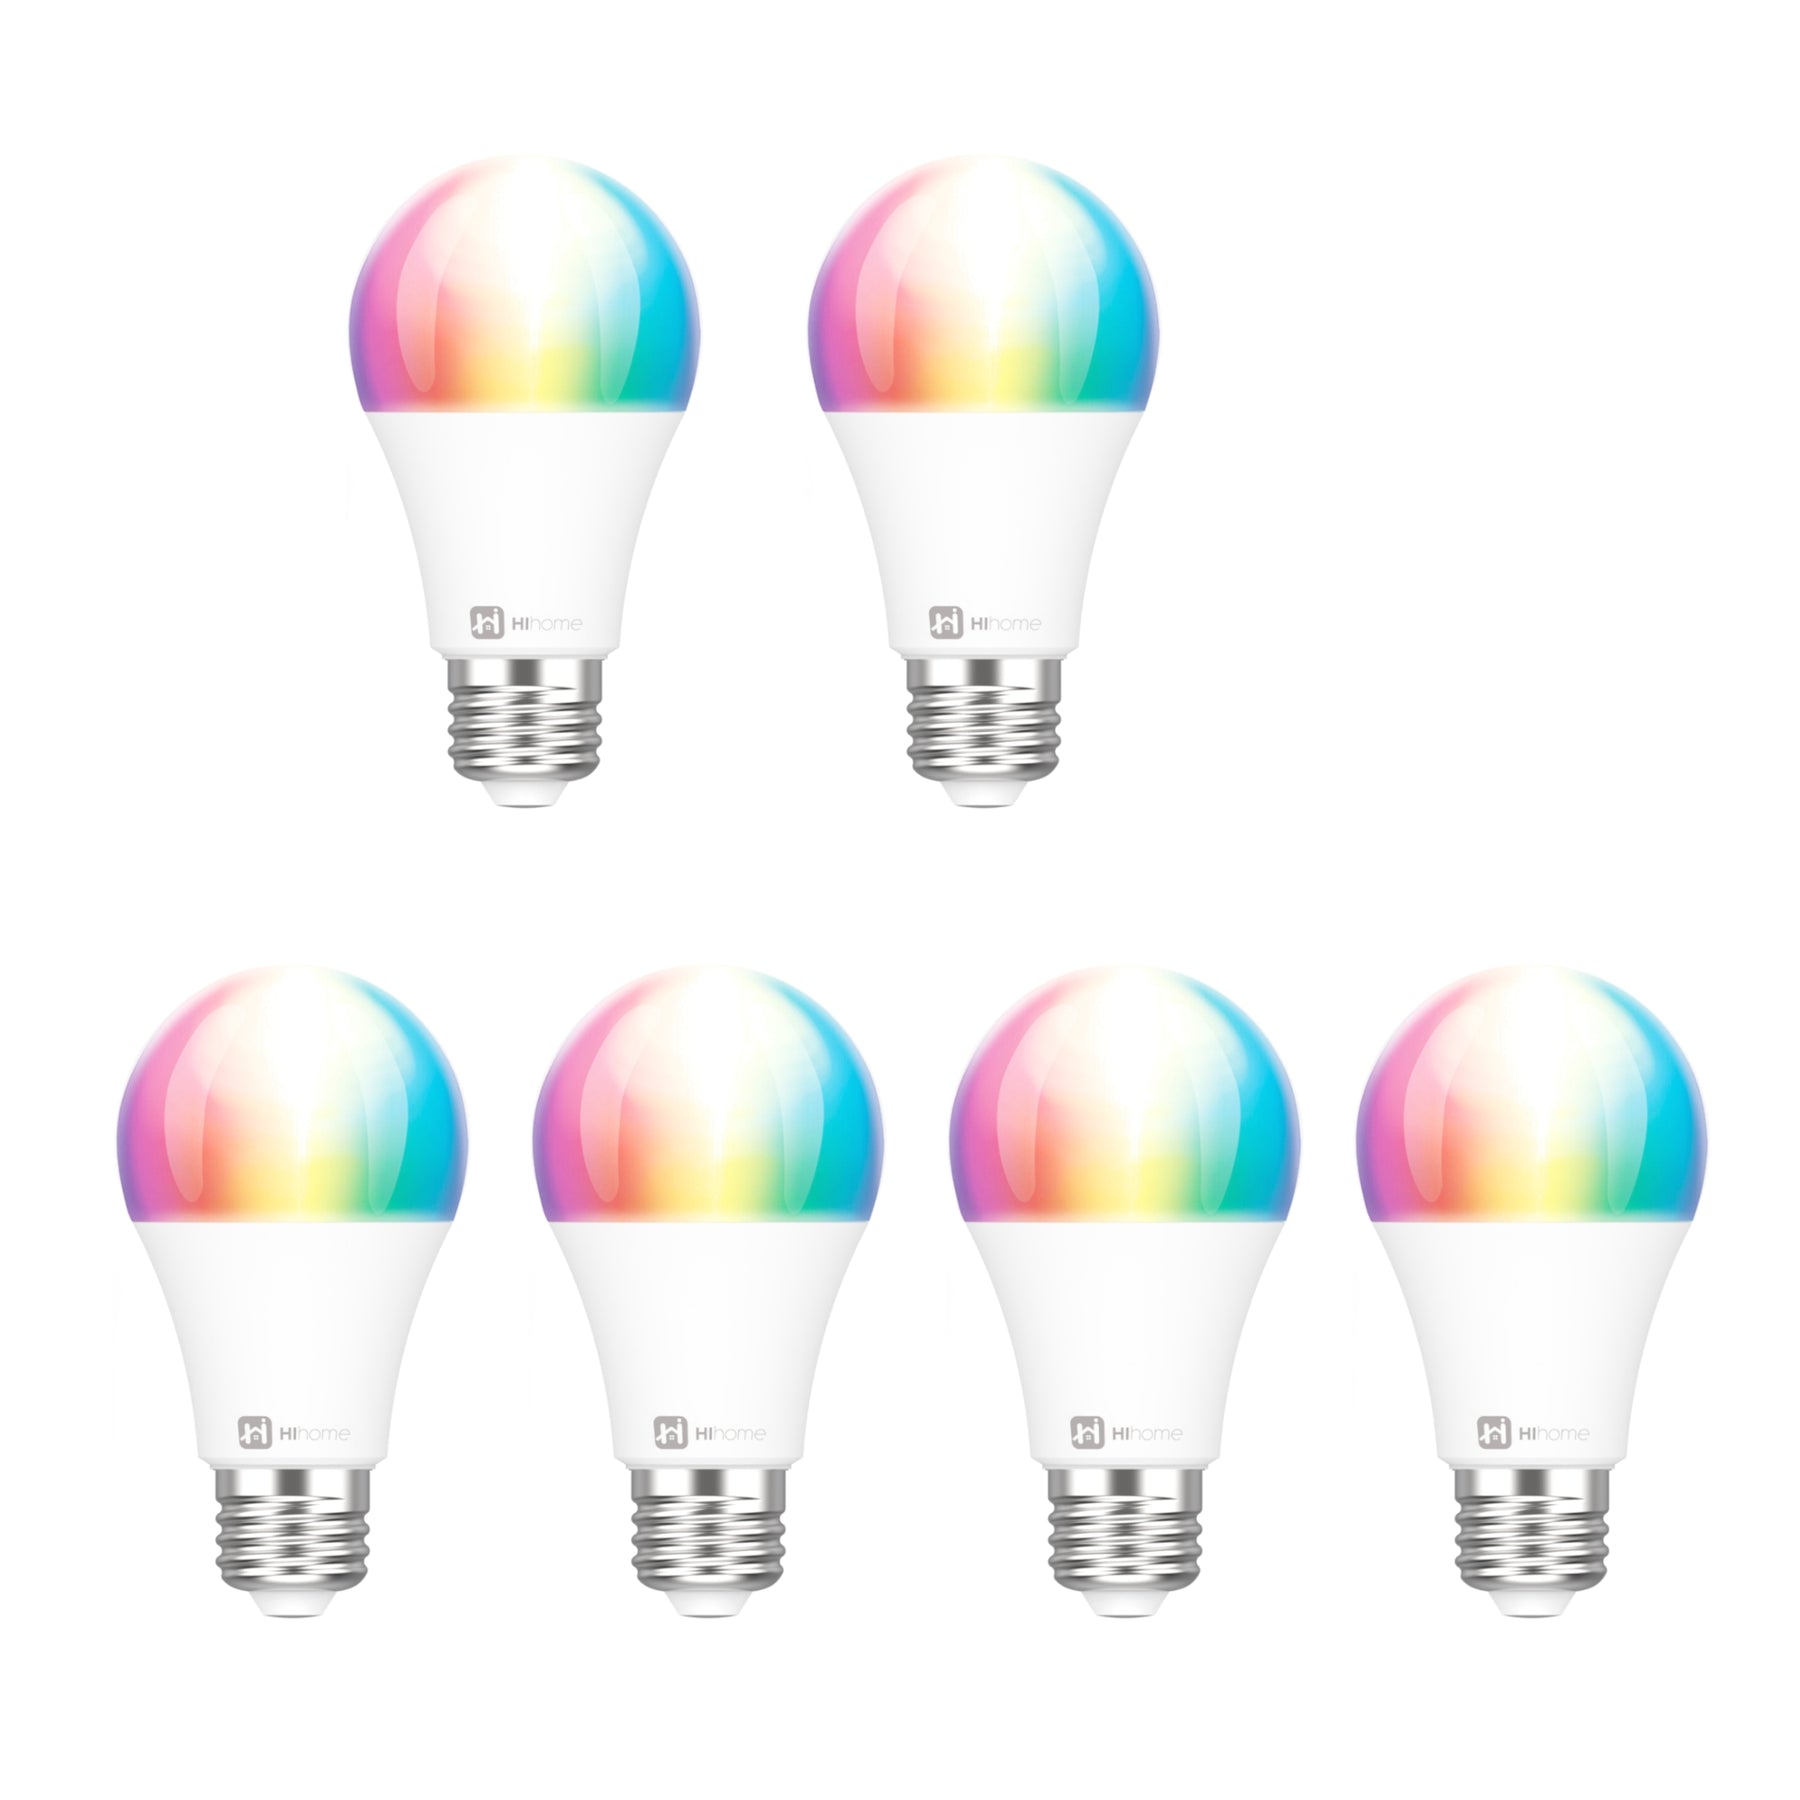 6-Pack Hihome Smart LED WiFi Bulb Gen.2 RGB 16M Colors + Warm White 2700K to Cool White 6500K